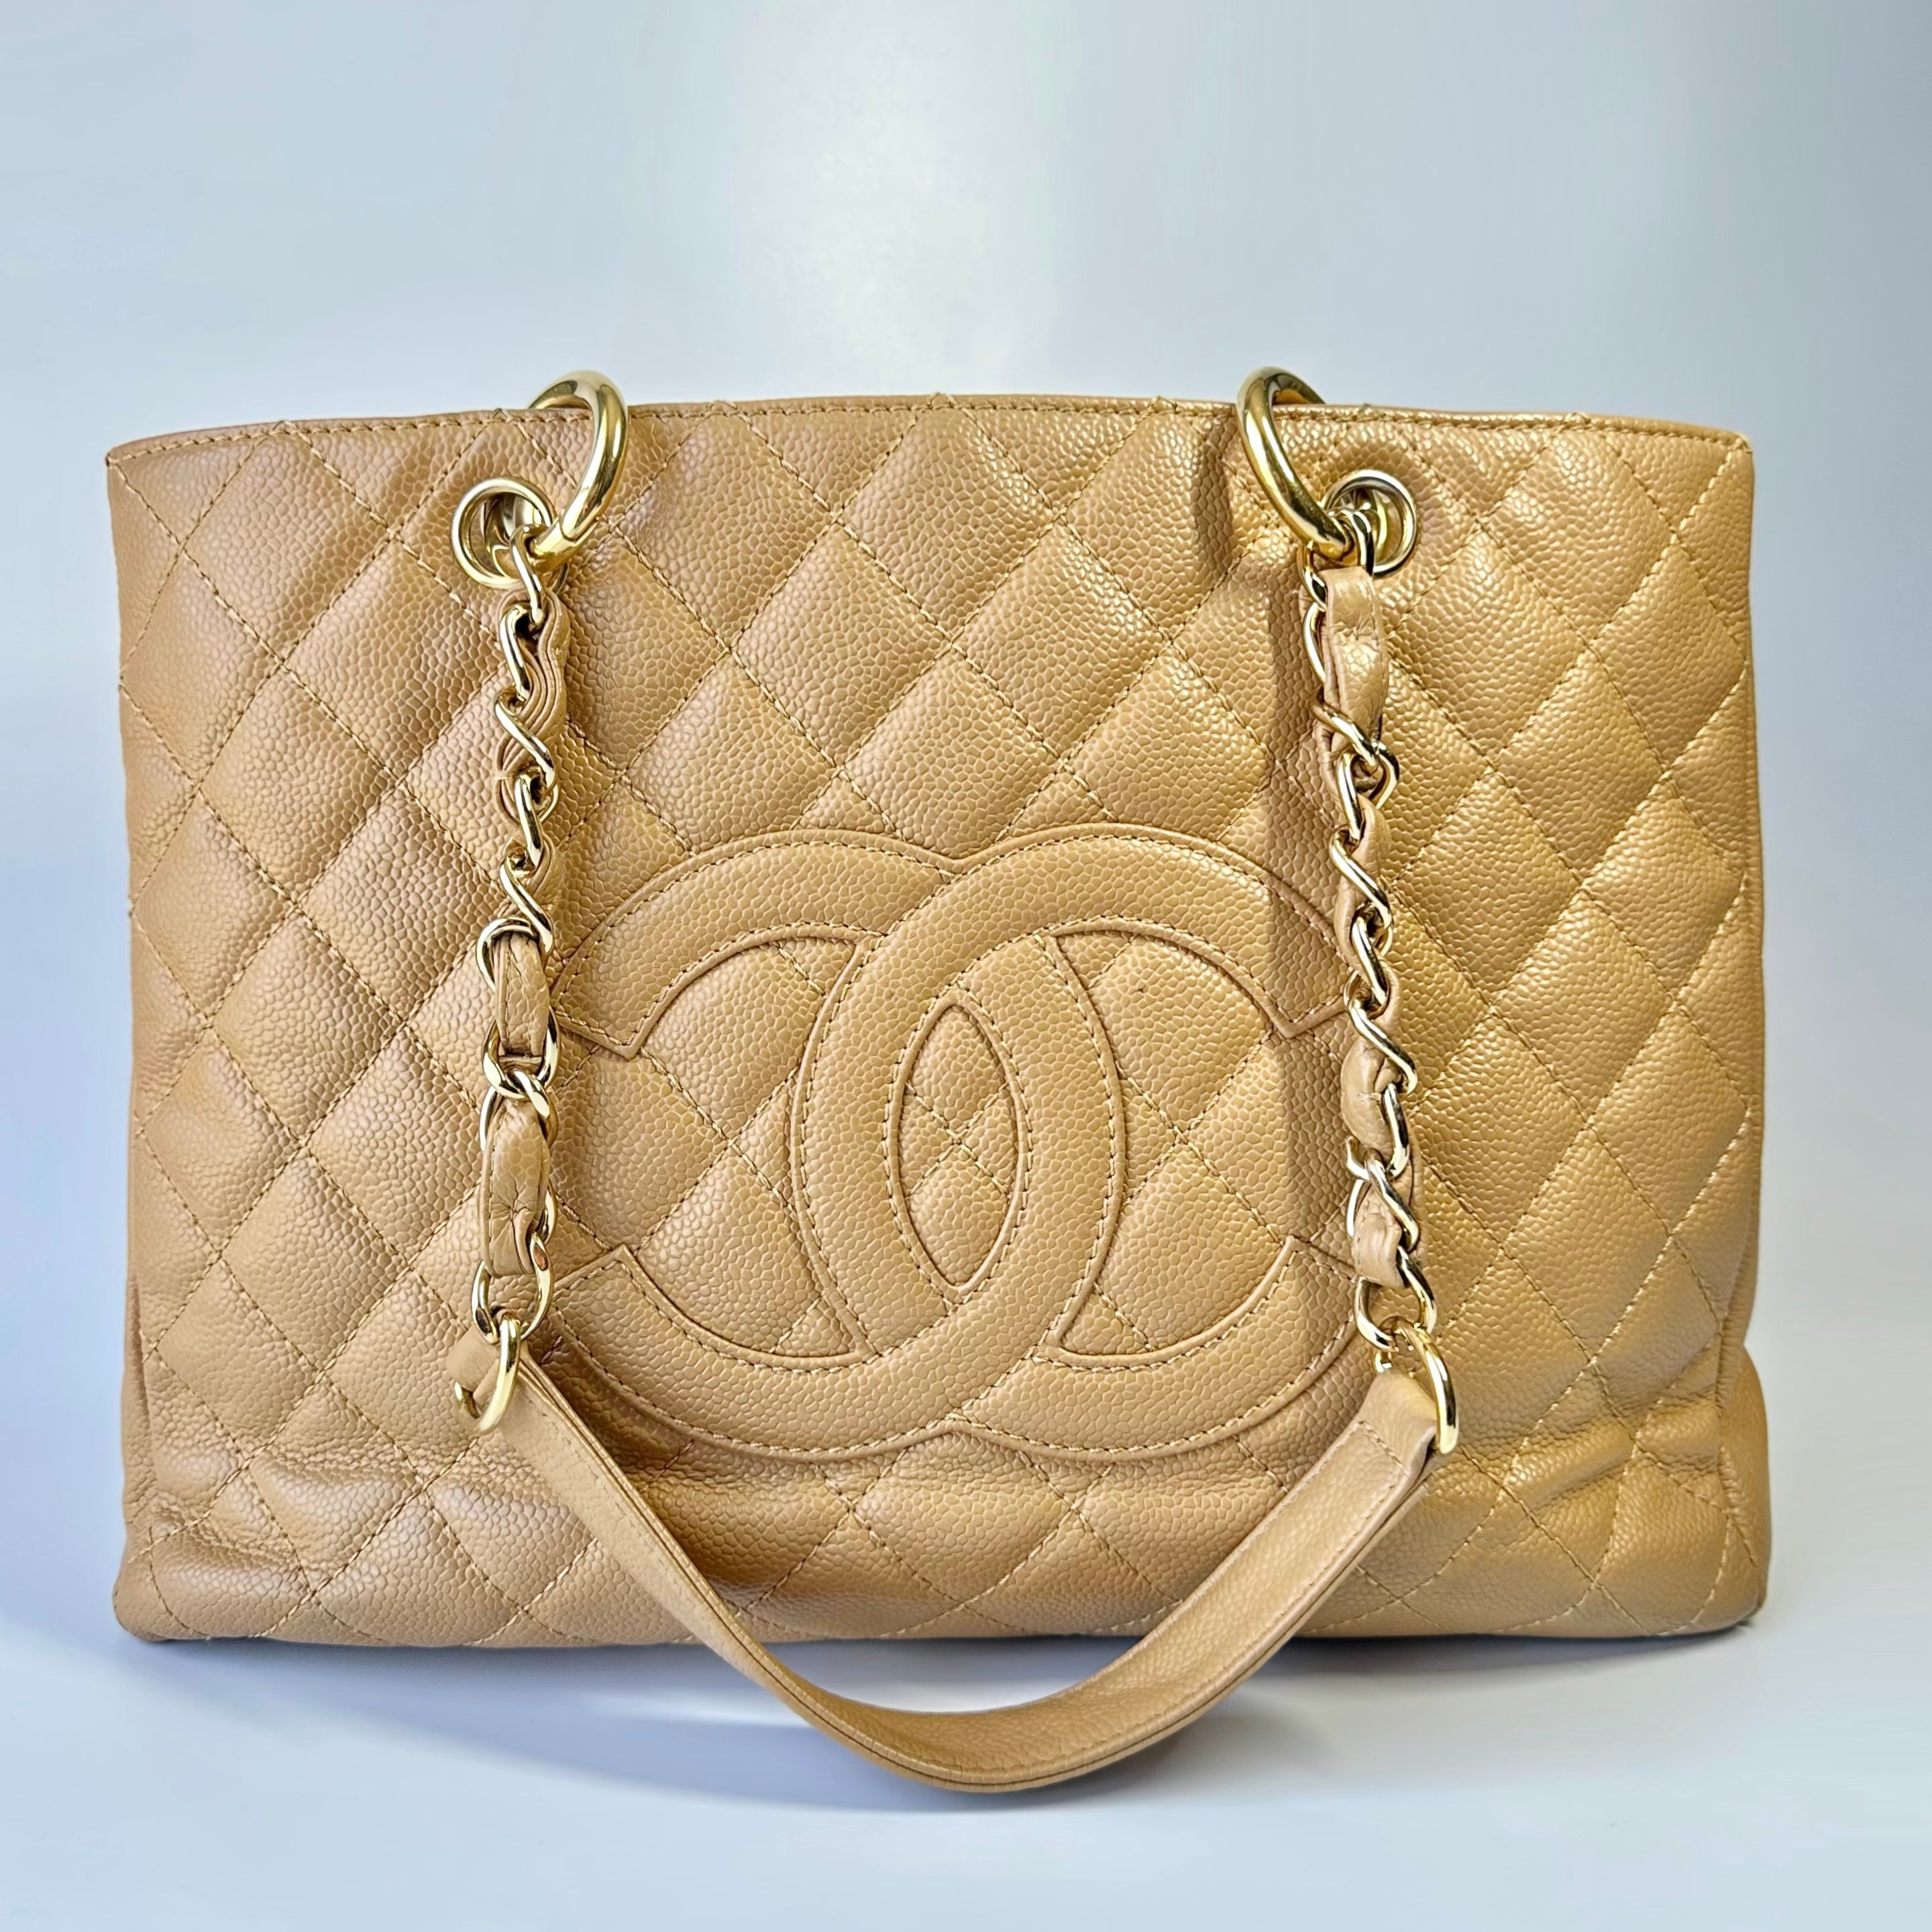 Chanel Grand Shopping Tote: The Big Shopping Tote Sister